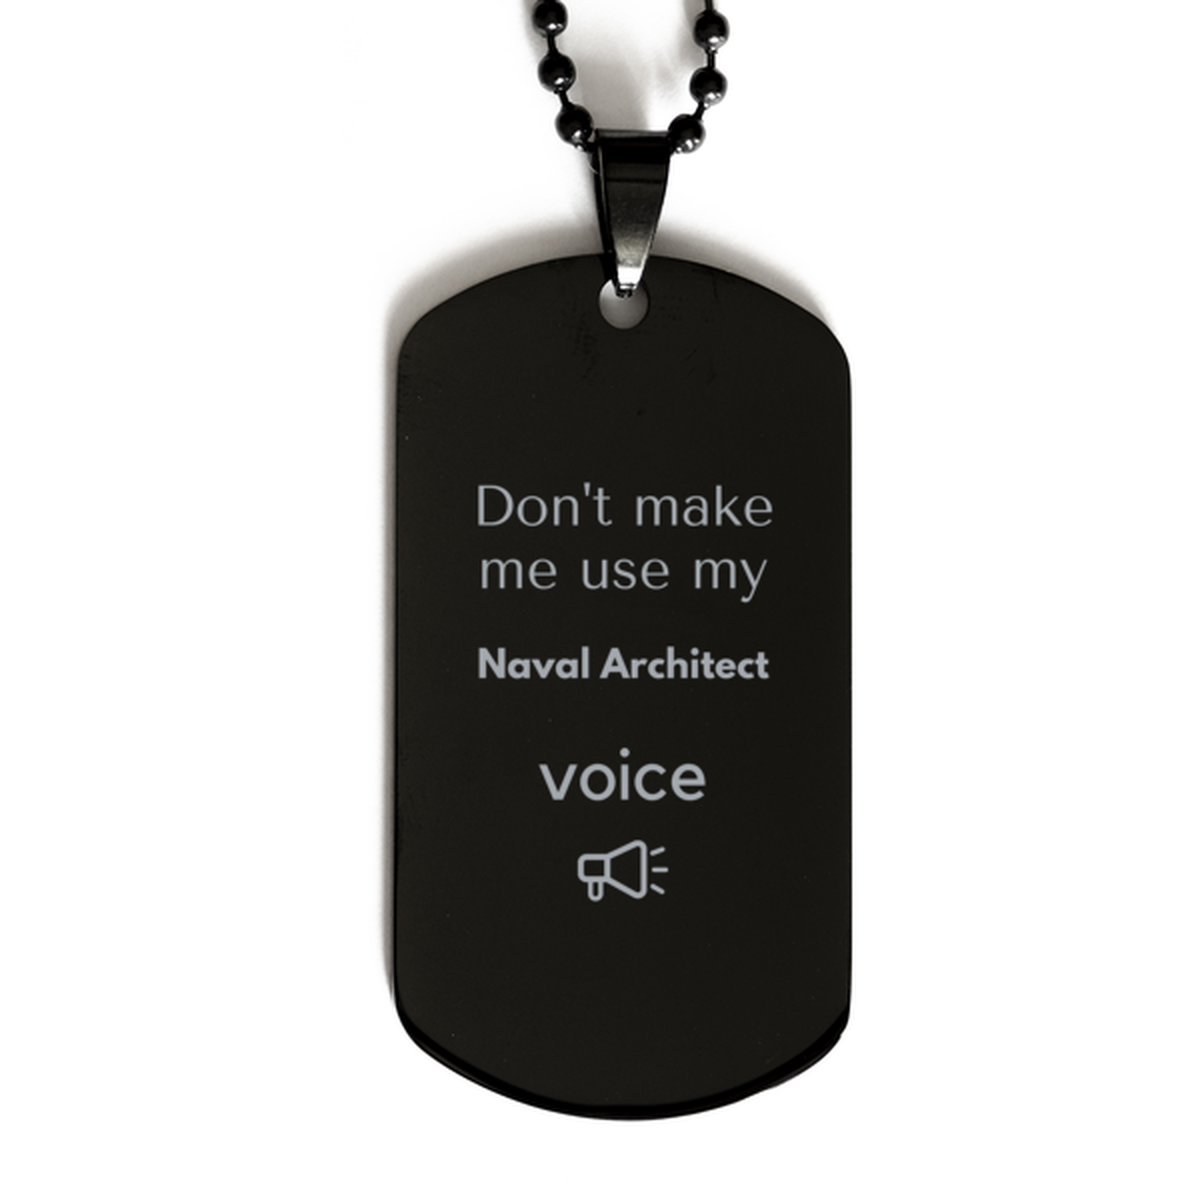 Don't make me use my Naval Architect voice, Sarcasm Naval Architect Gifts, Christmas Naval Architect Black Dog Tag Birthday Unique Gifts For Naval Architect Coworkers, Men, Women, Colleague, Friends